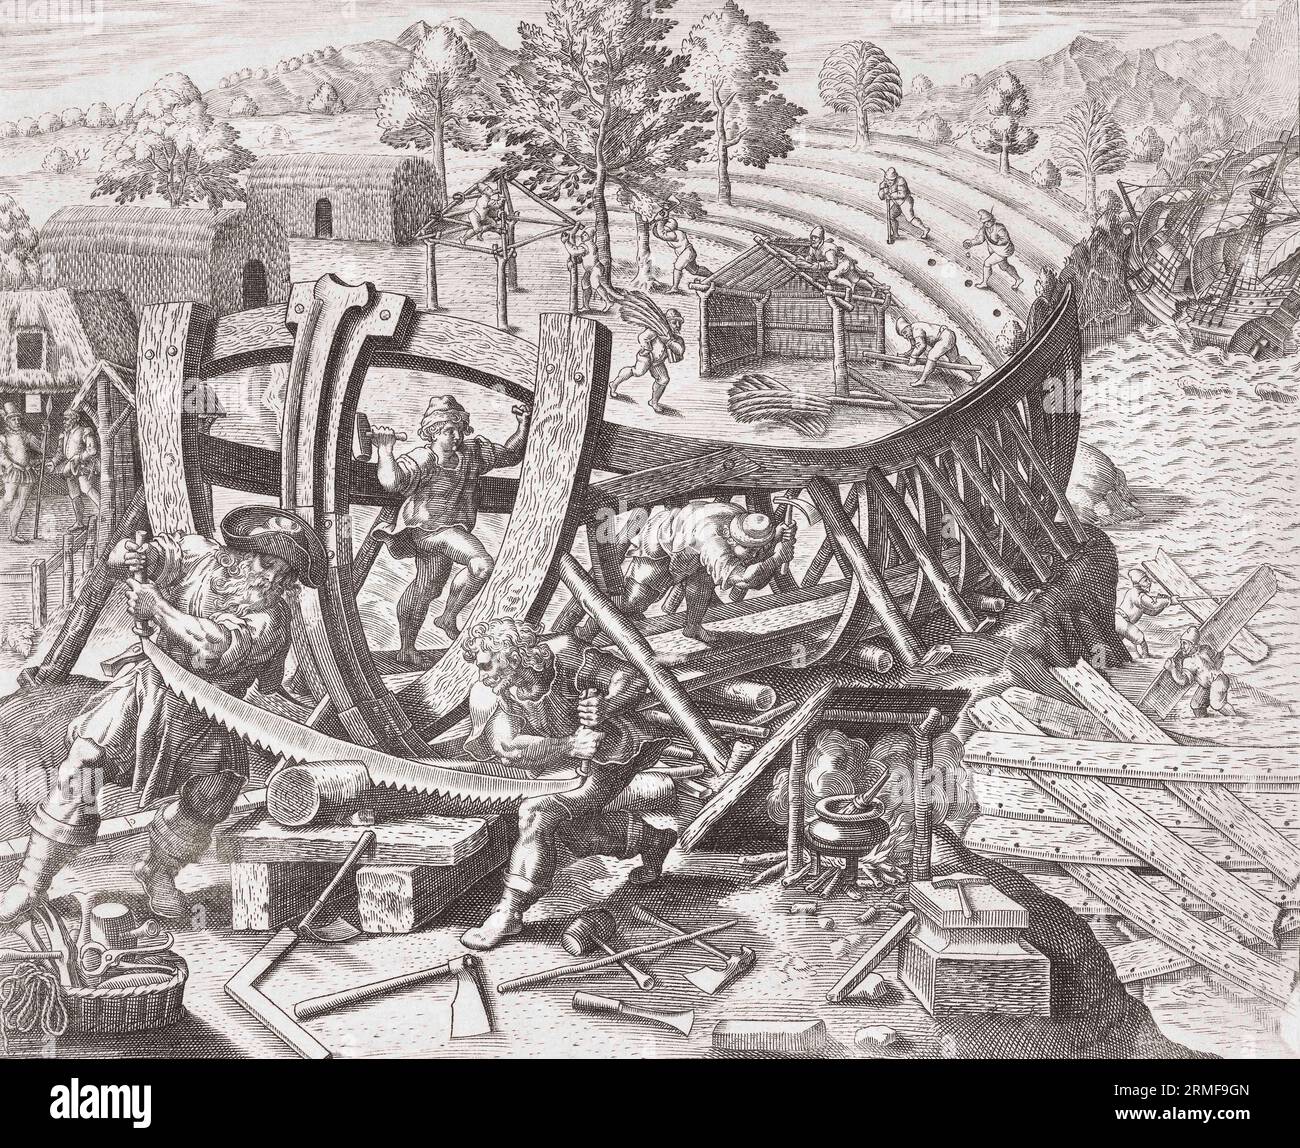 Shipwrecked settlers building a new boat.  On the right men gather wood from the wreck and bring it to where the new boat is being built.  Other men plant crops for food for the onward journey.   After a late 16th century work by Theodor de Bry. Stock Photo